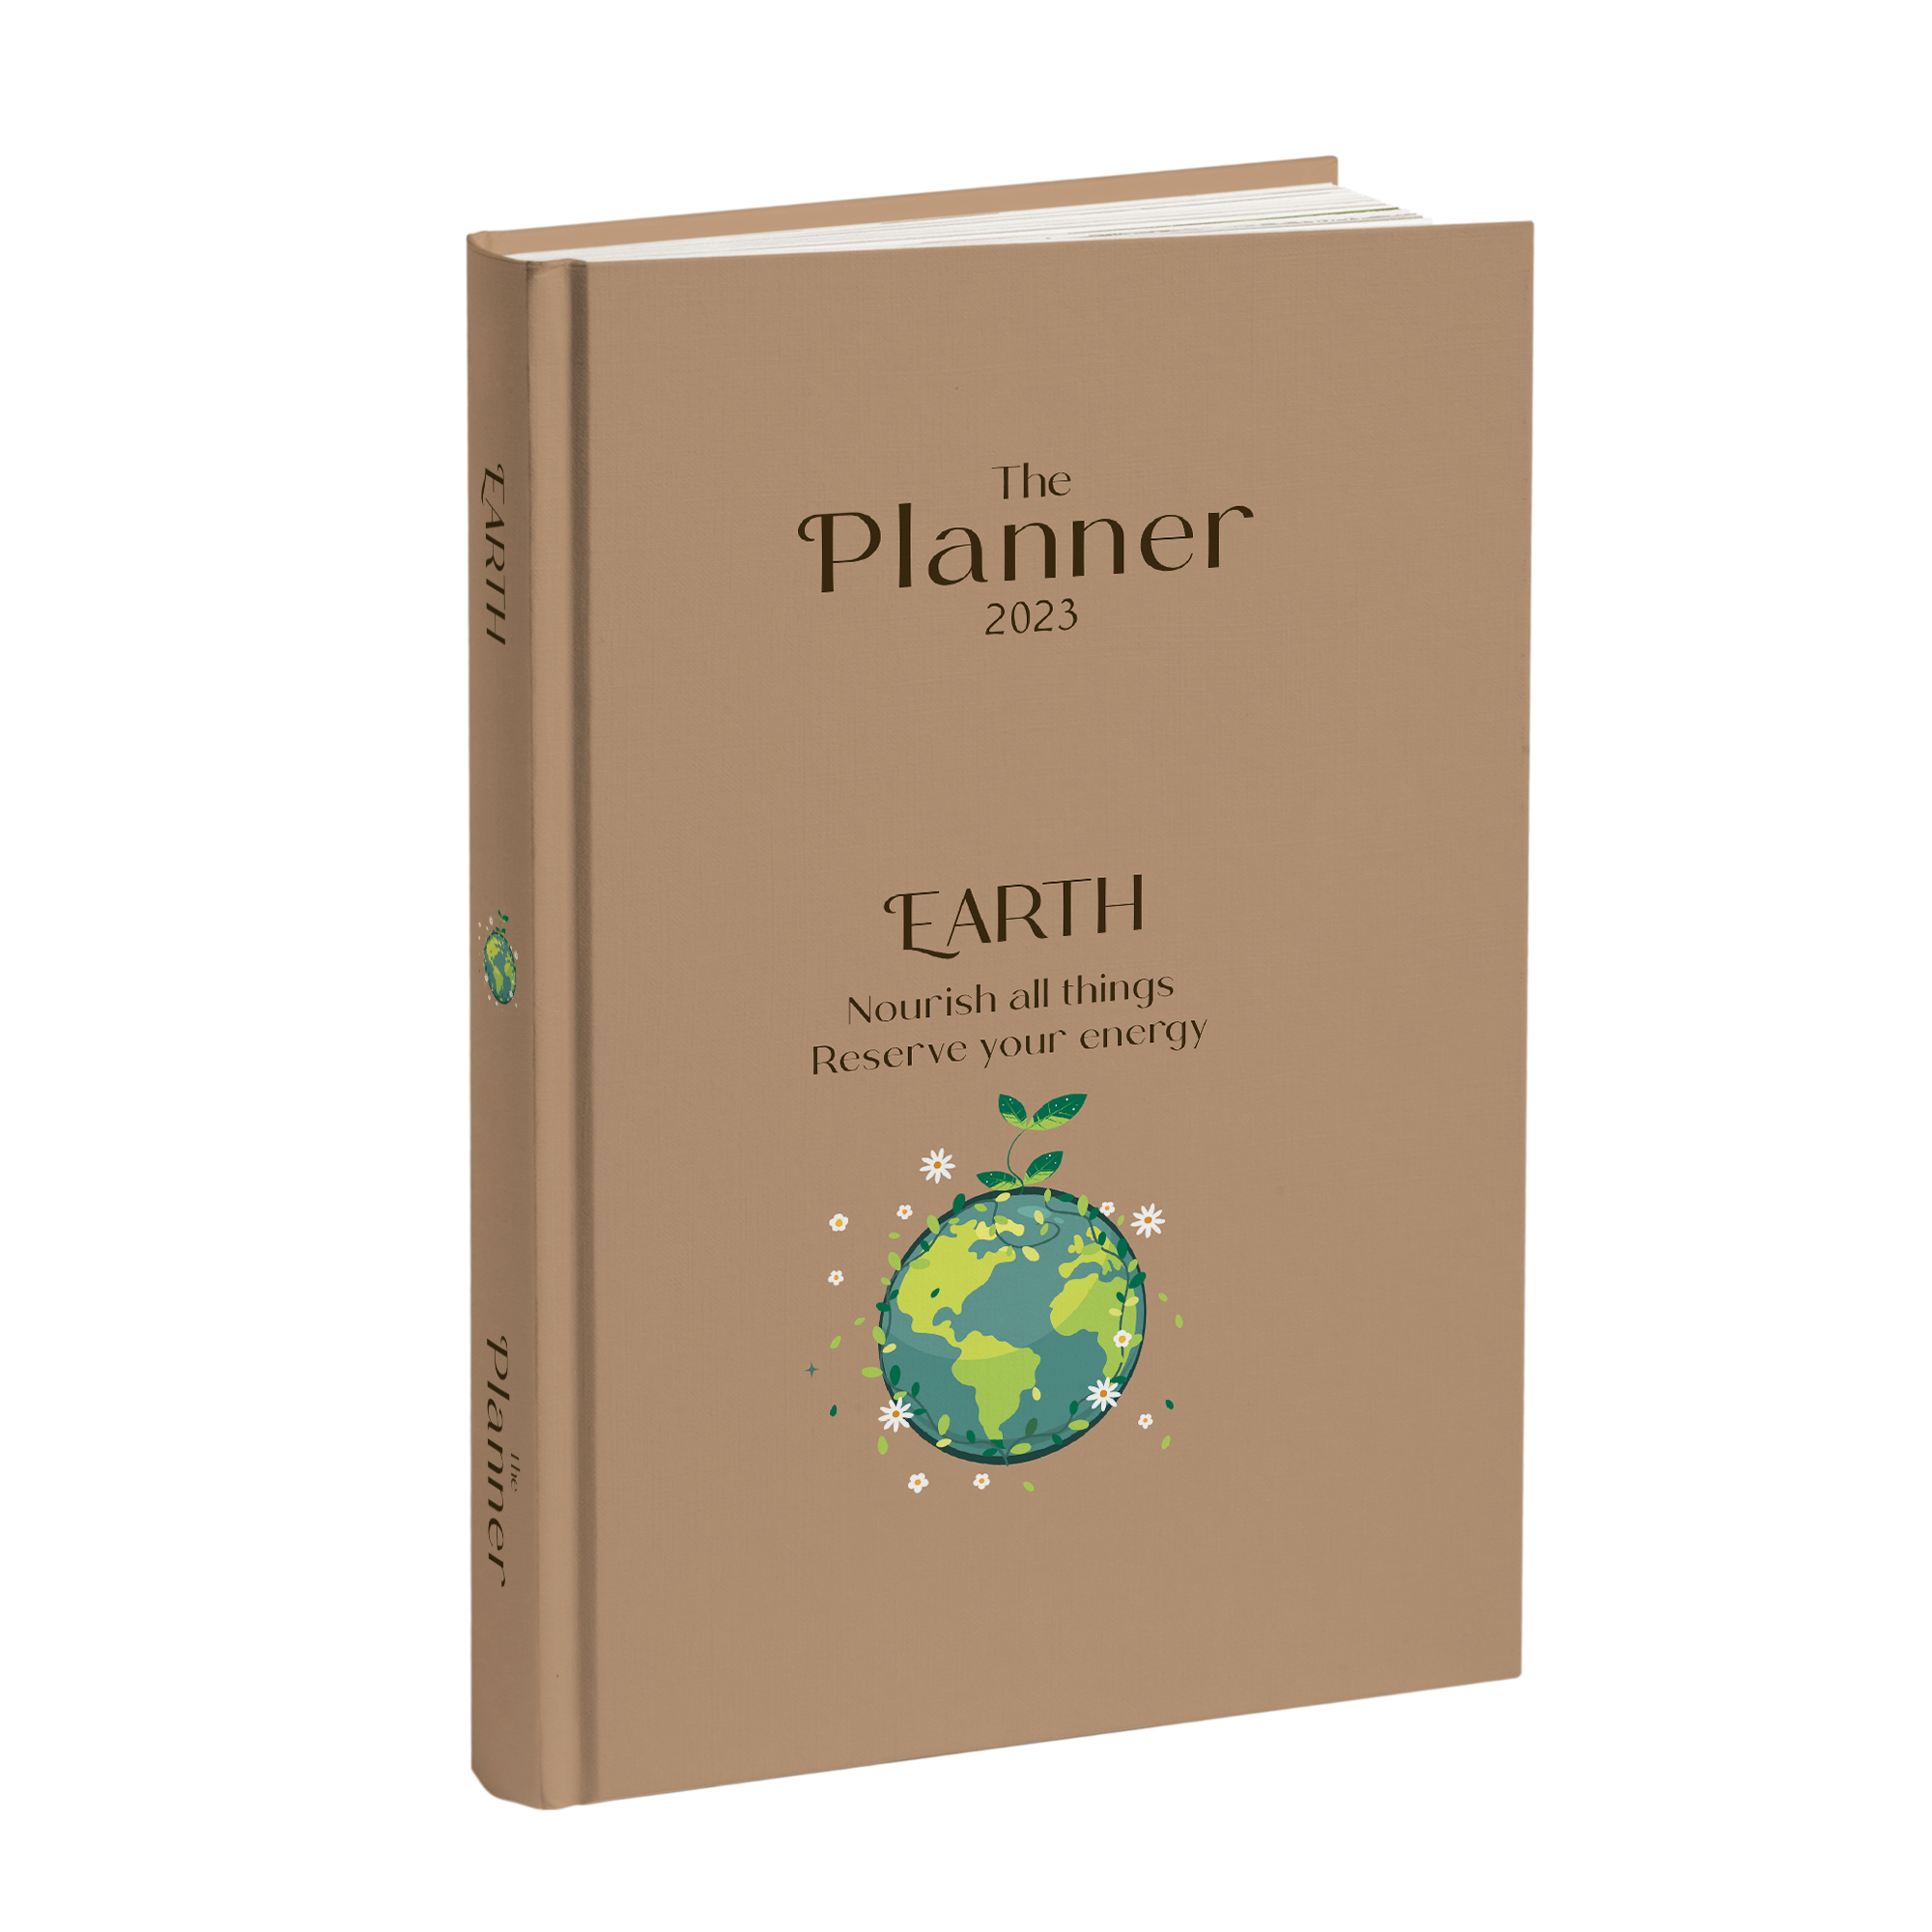 Cá Chép - Sổ Planner 2023 - EARTH: Nourish all things - Reserve your energy